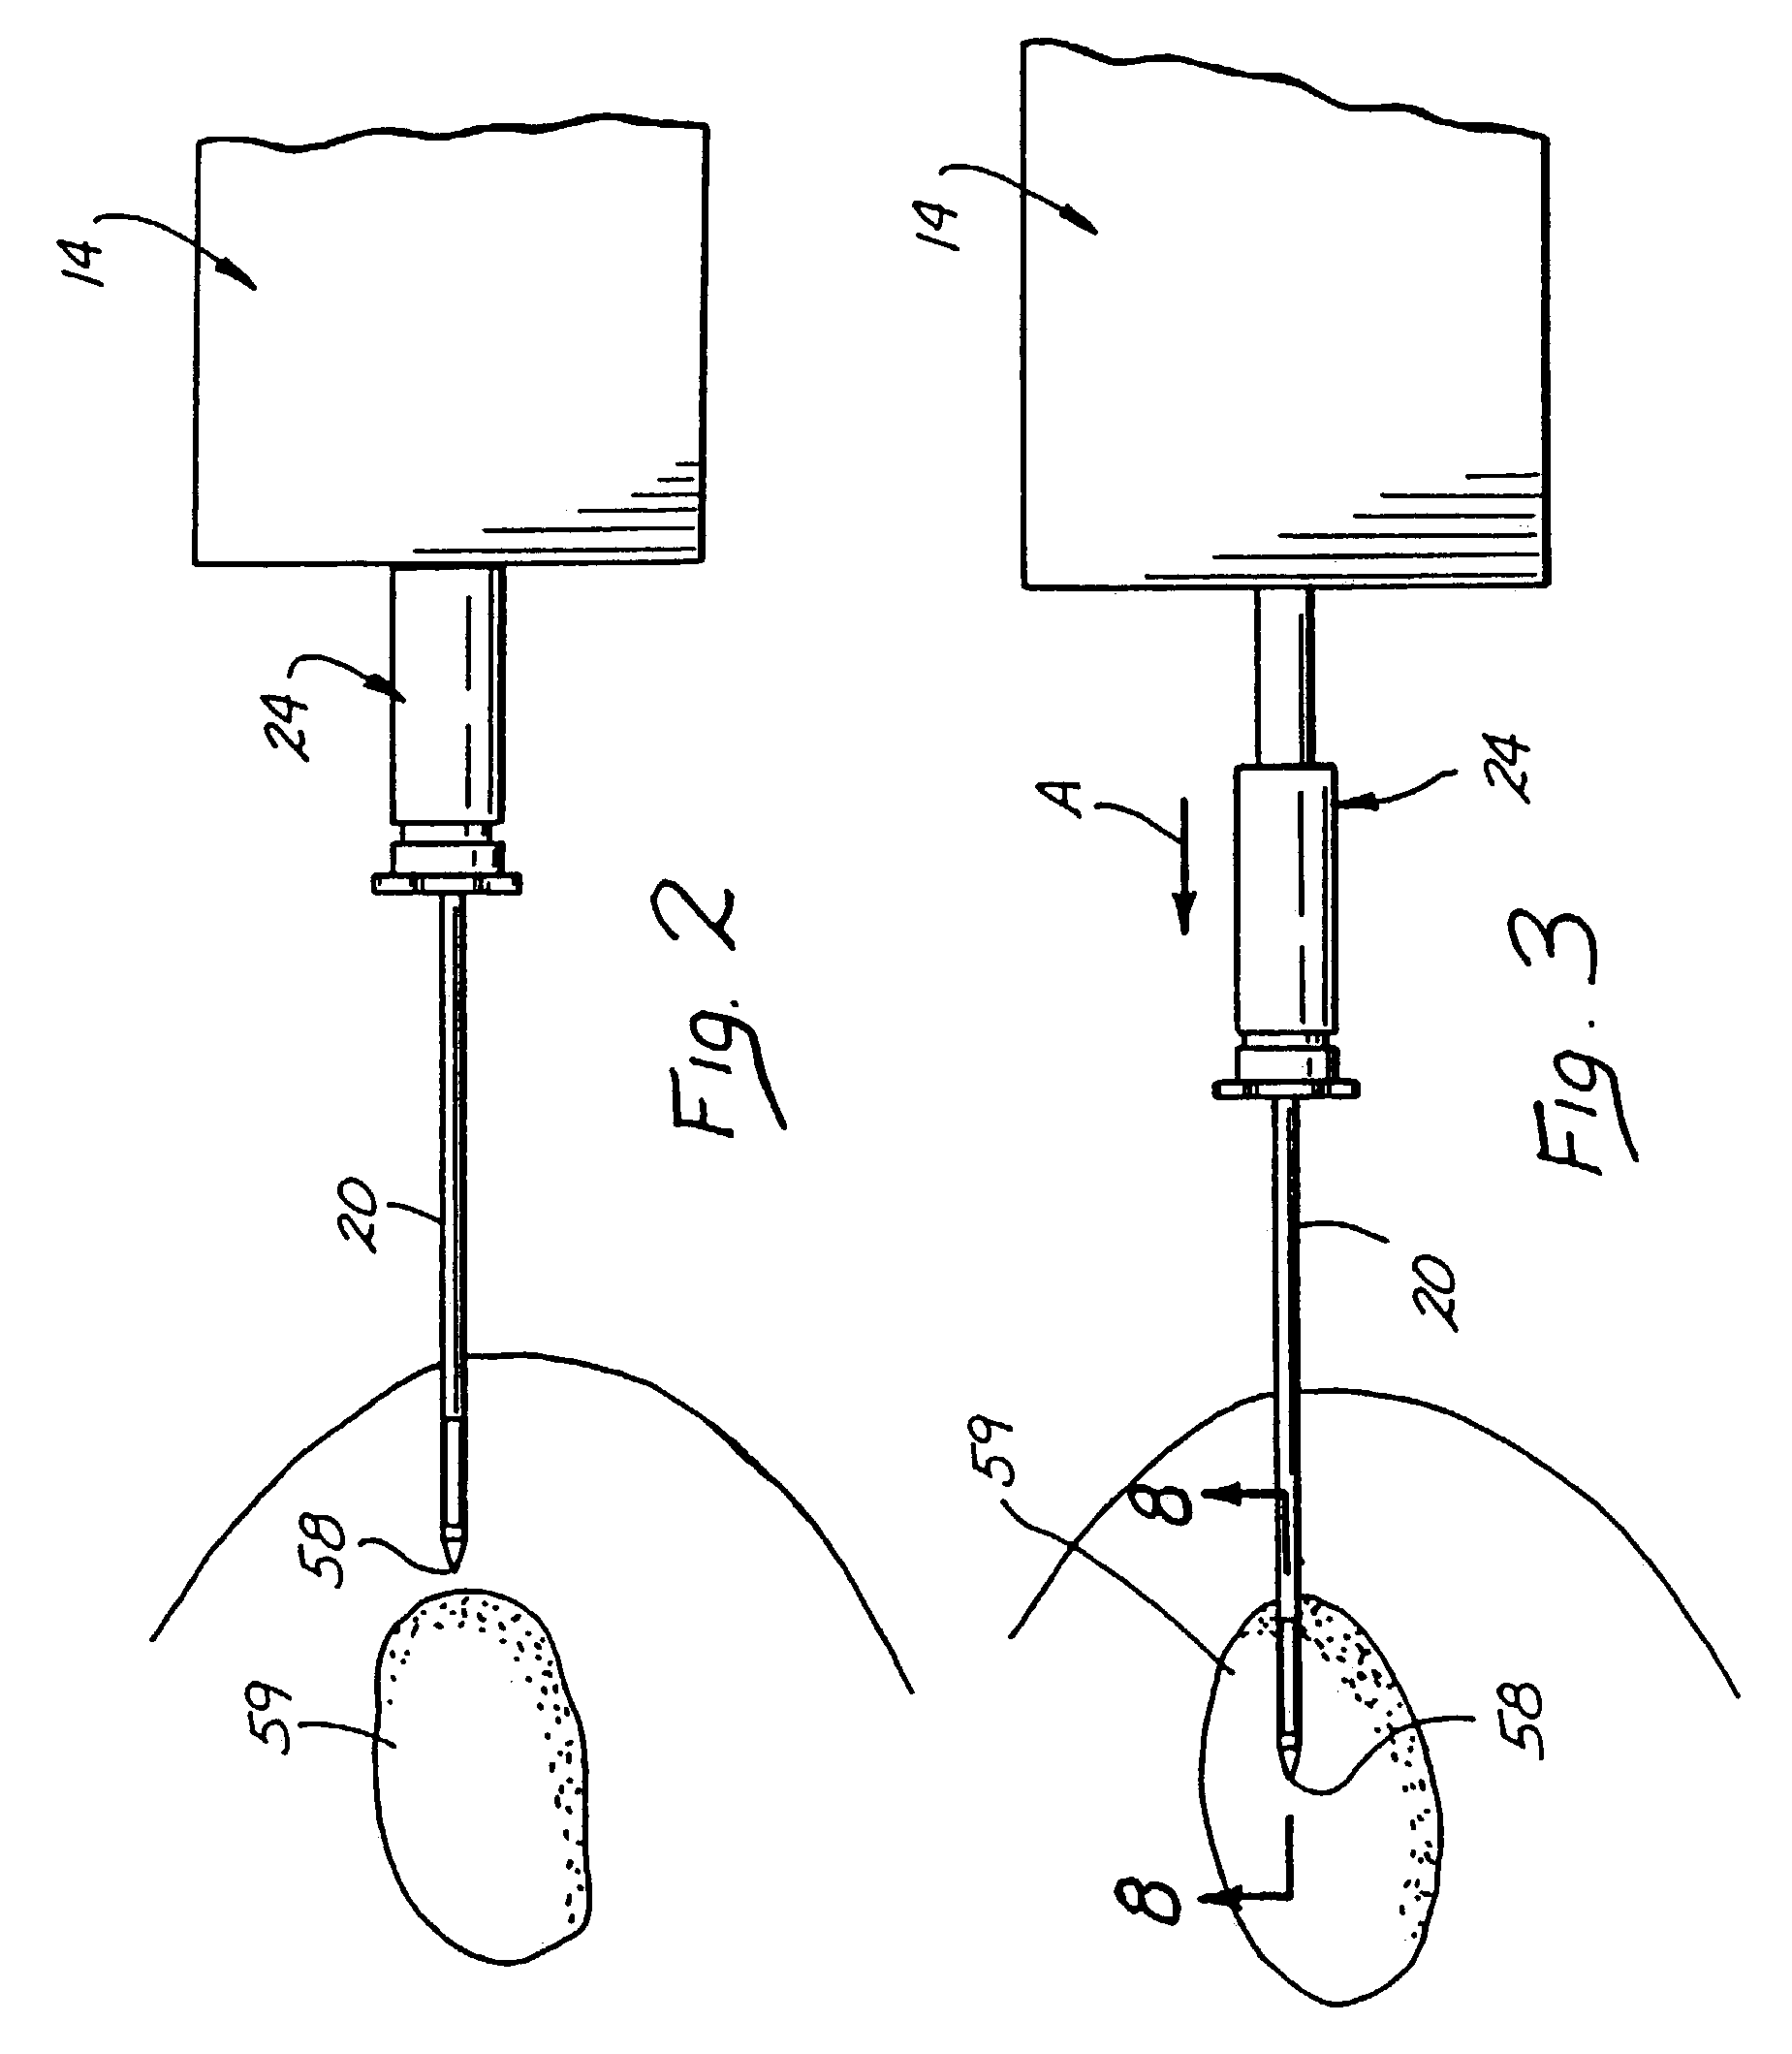 Methods and devices for automated biopsy and collection of soft tissue